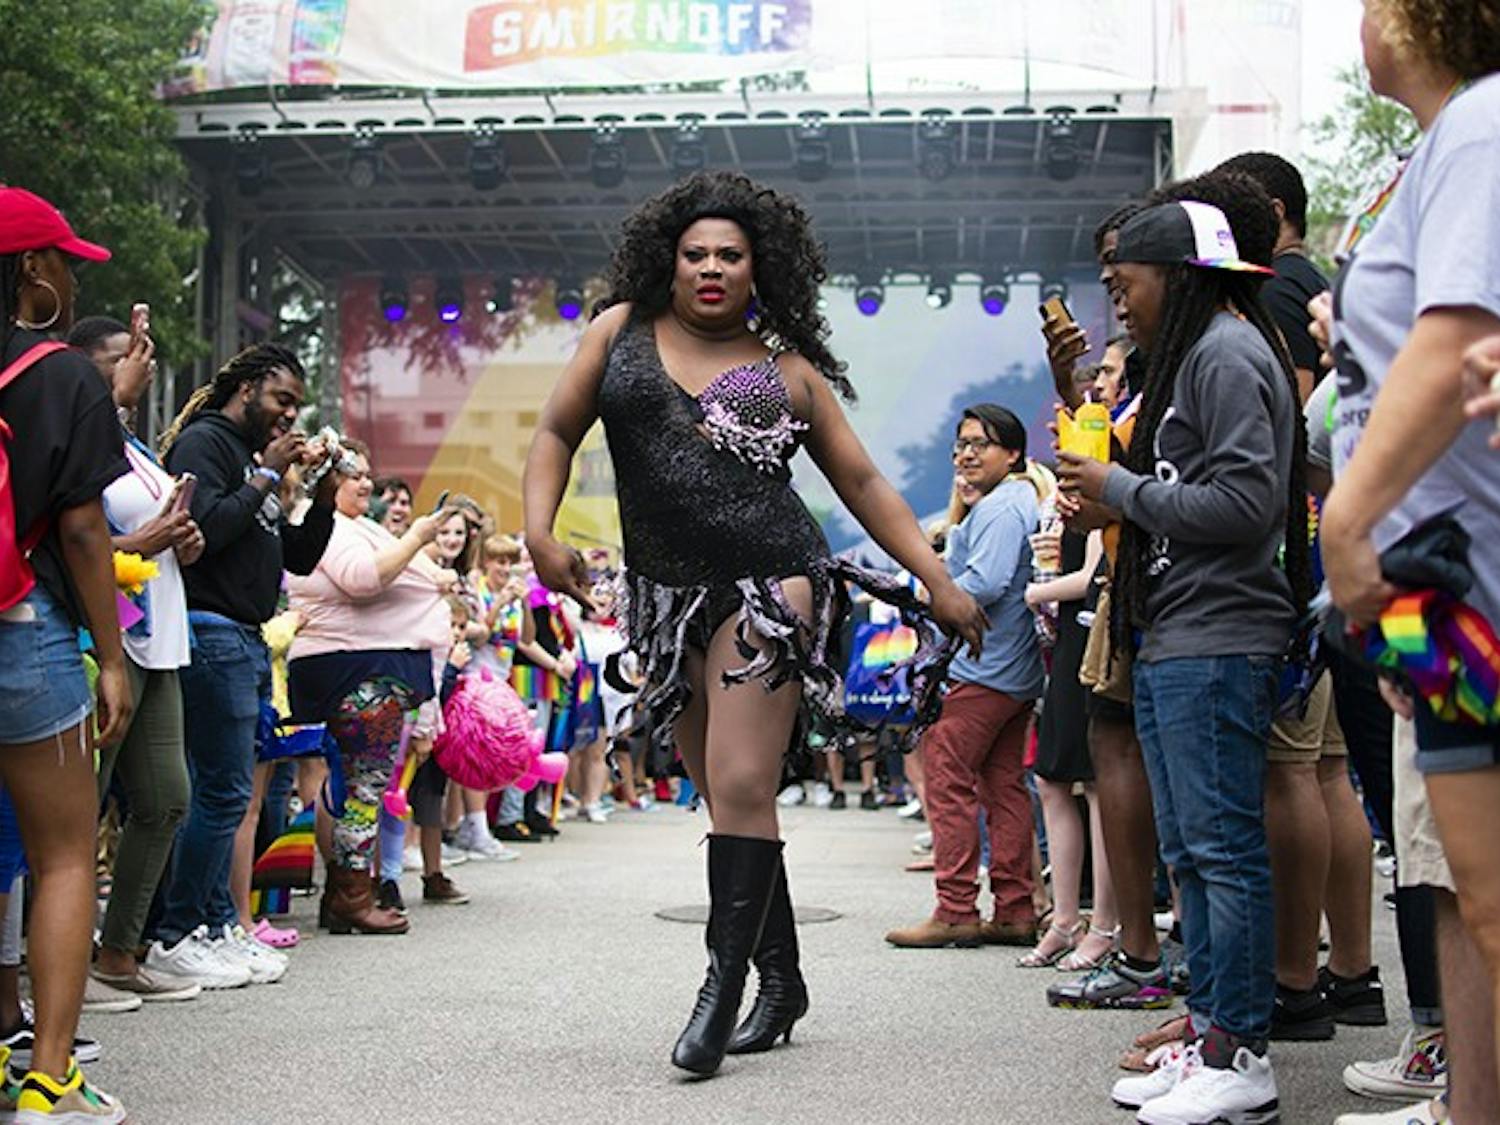 Local drag queen Paris LeFaris performs amidst the audience for Famously Hot South Carolina Pride Festival on Oct. 5th.